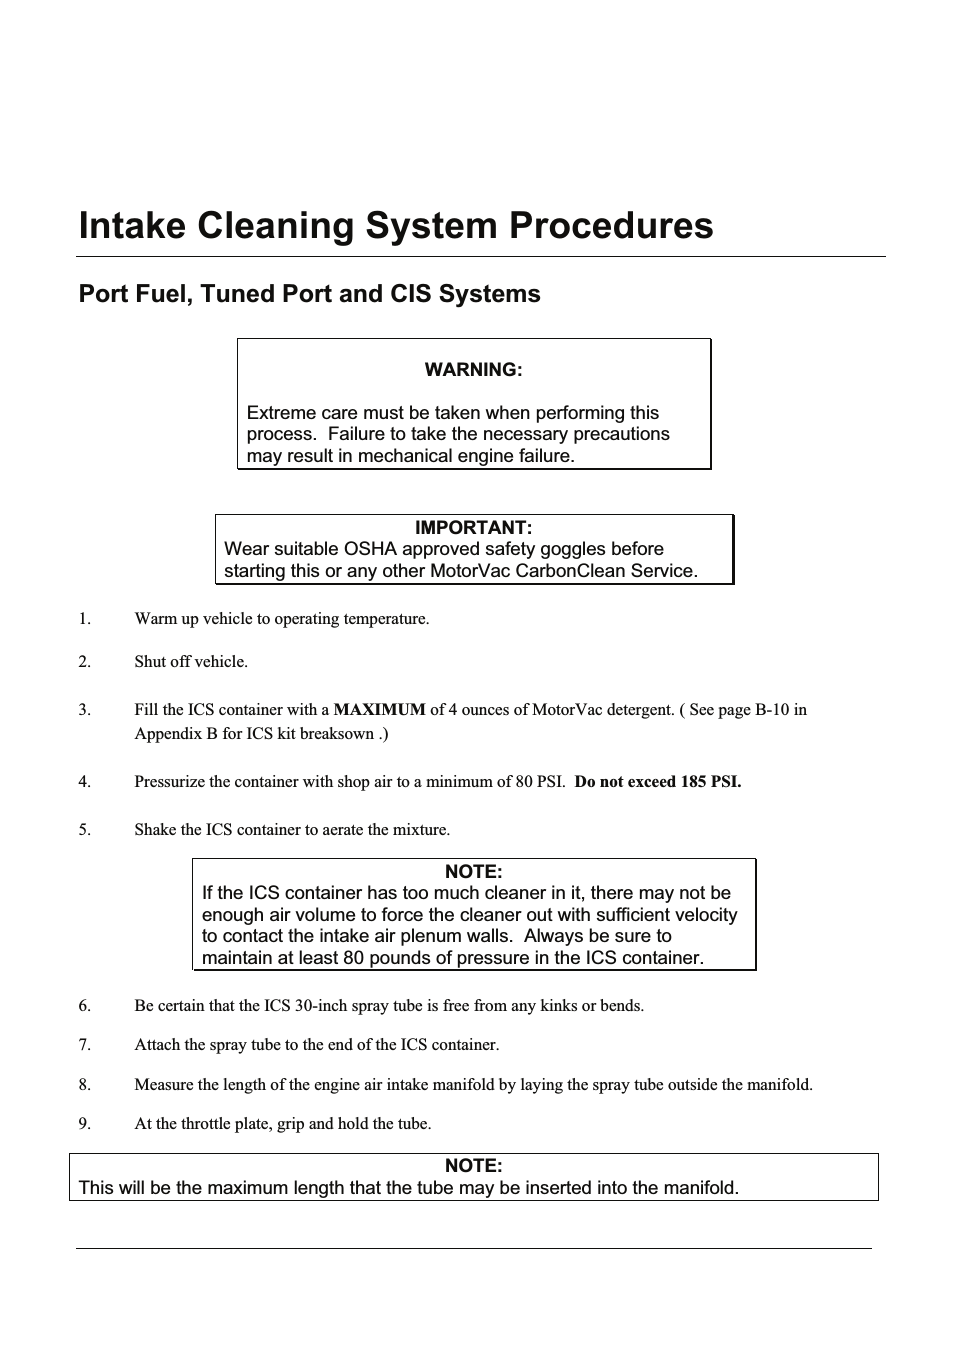 Intake Cleaning System Procedures